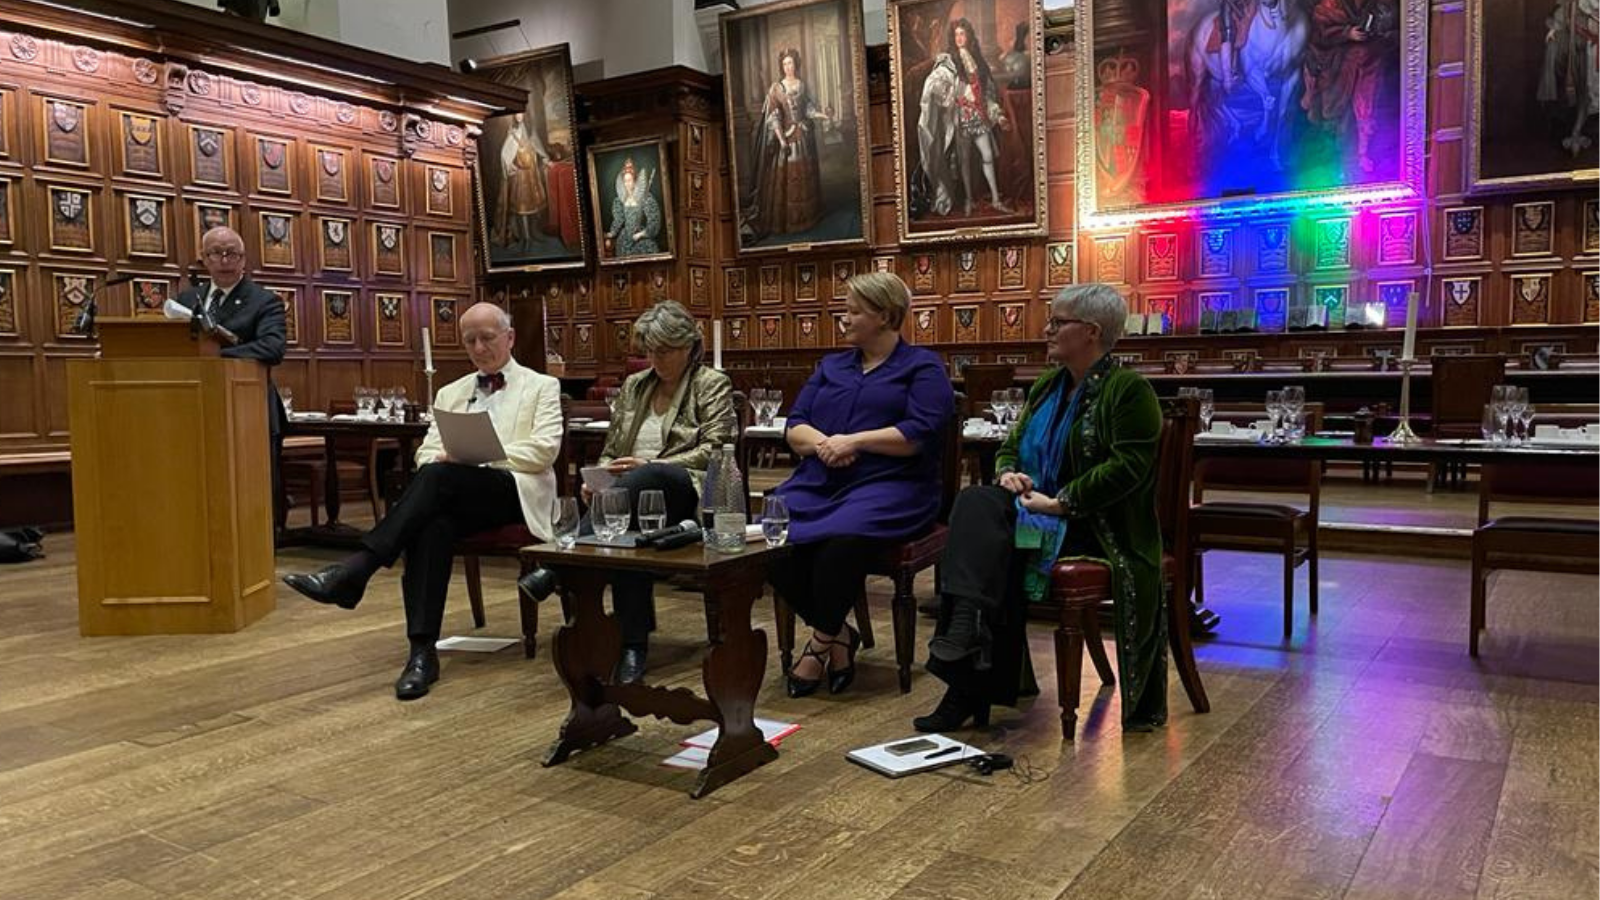 The speakers in Middle Temple